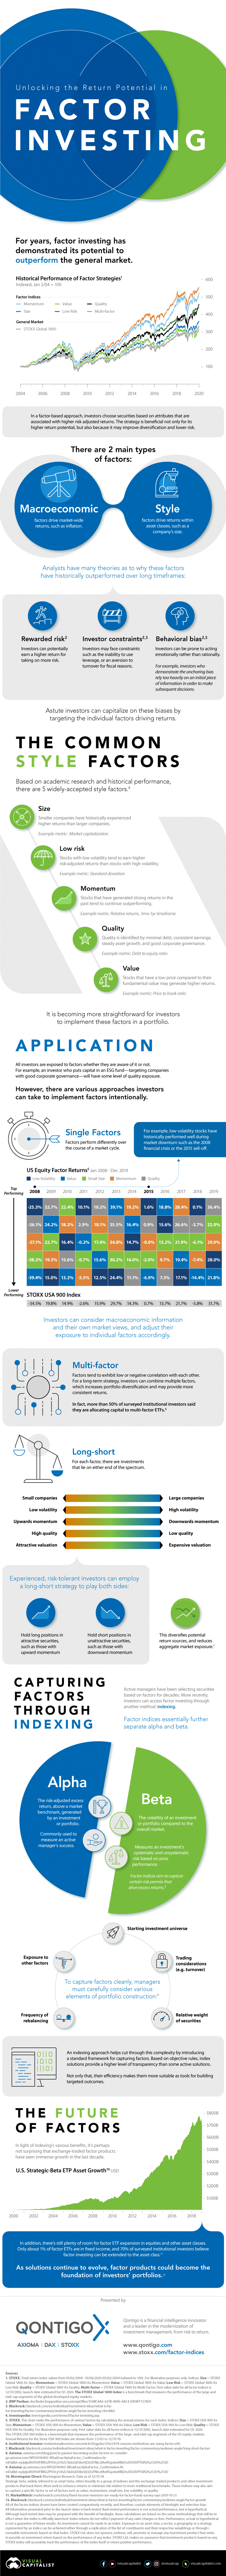 Factor Investing infographic